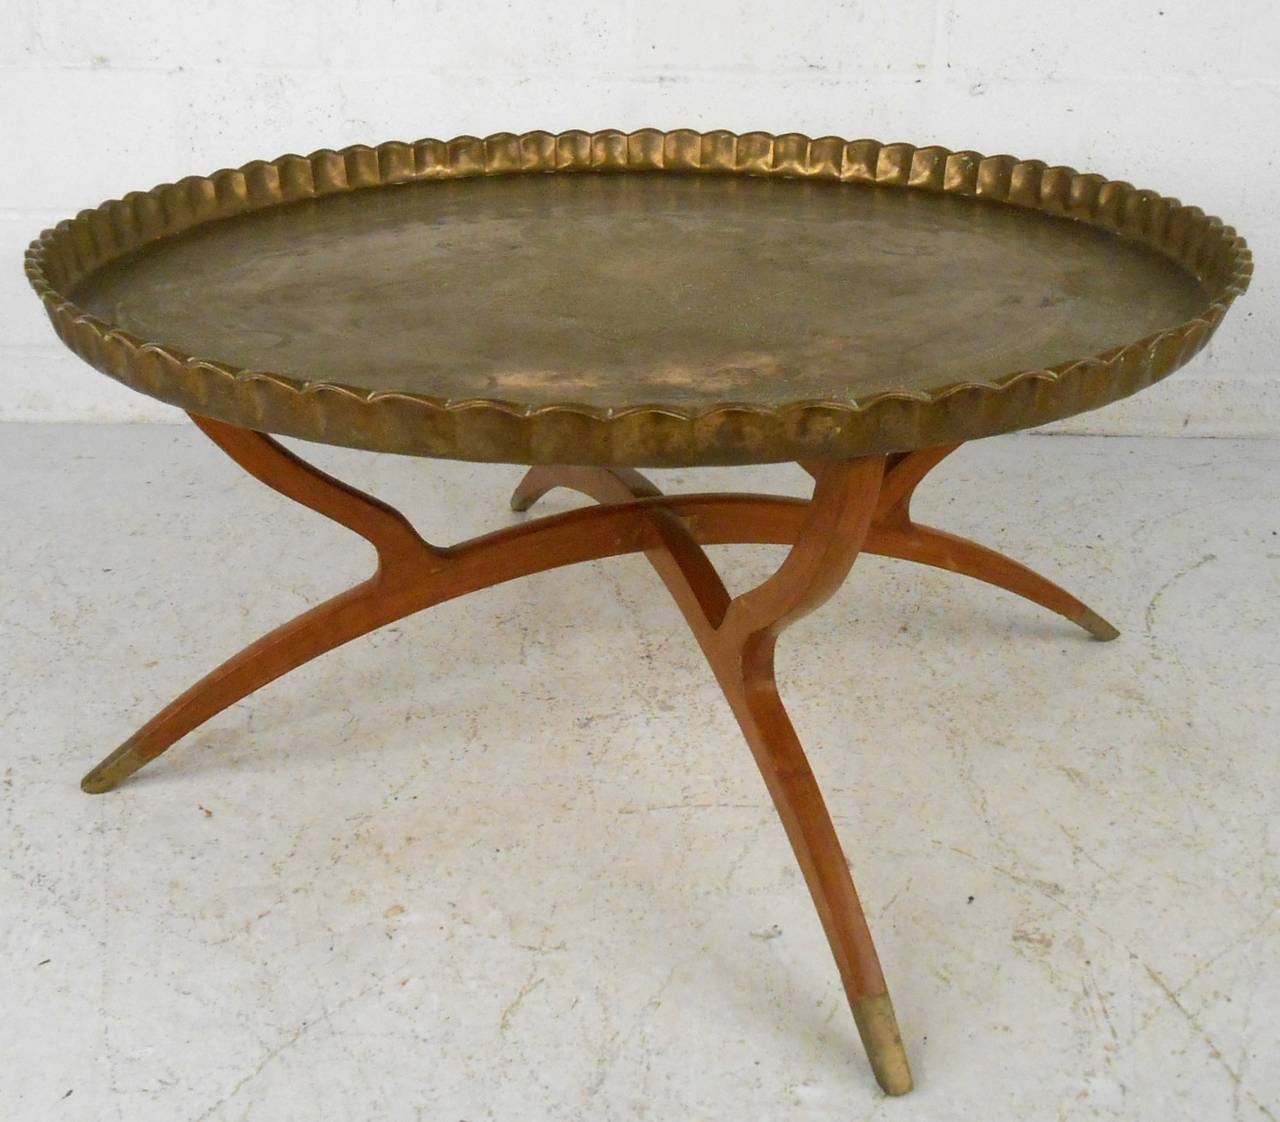 This unique brass tray table sits on folding brass tipped frame and makes a unique center table for any seating are. Unique etching and textured design, please confirm item location (NY or NJ).